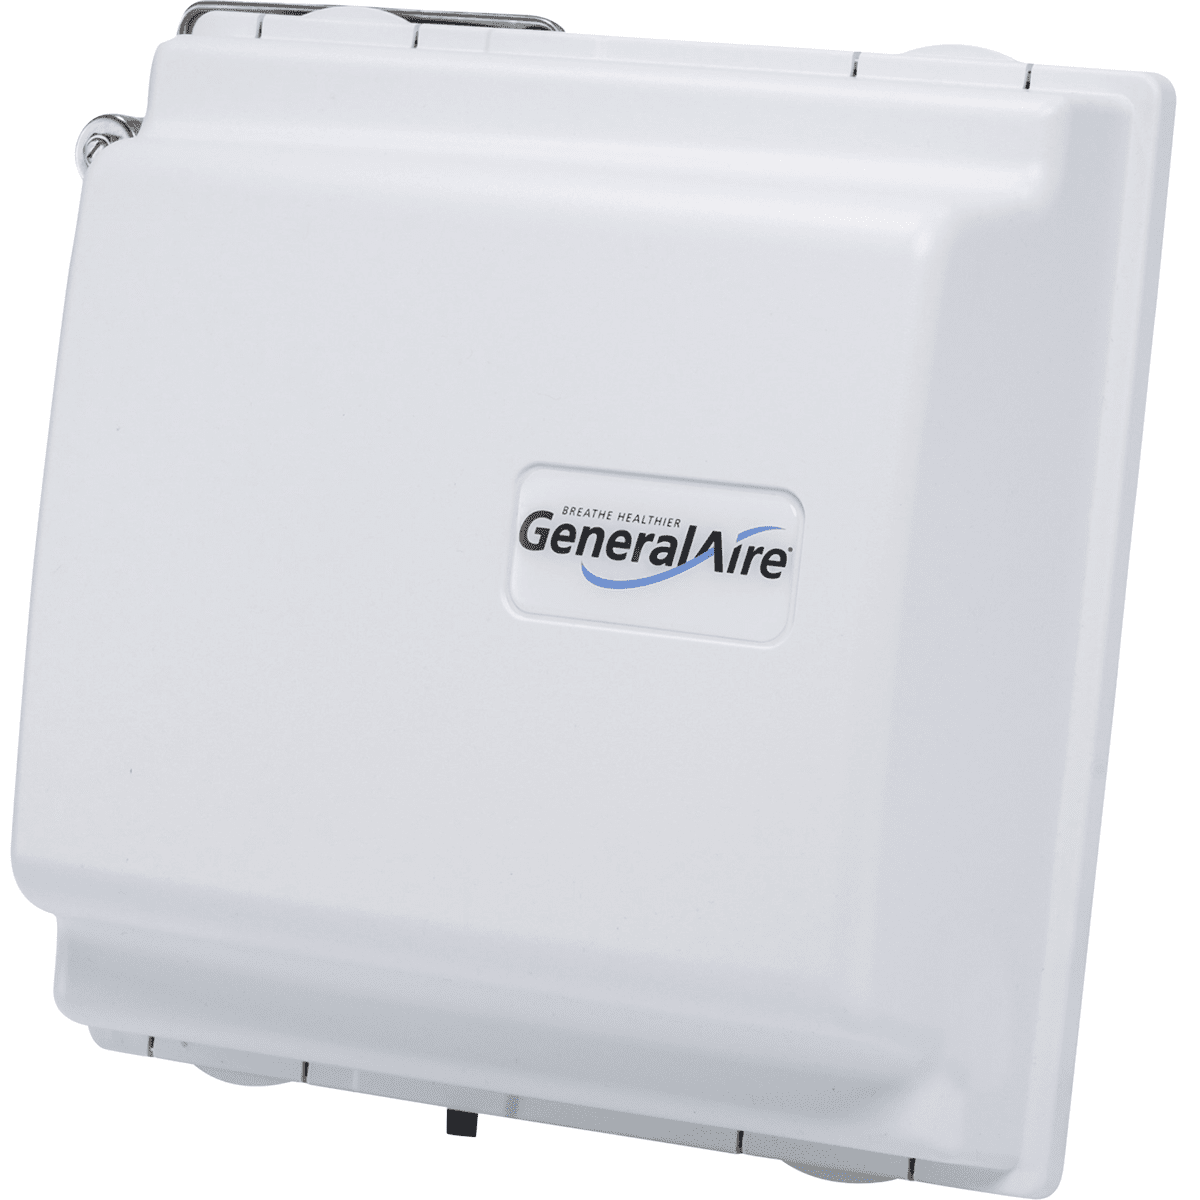 General Aire Model 4400A Fan-Powered Evaporative Humidifier For Up To 4,400 Sq. Ft.